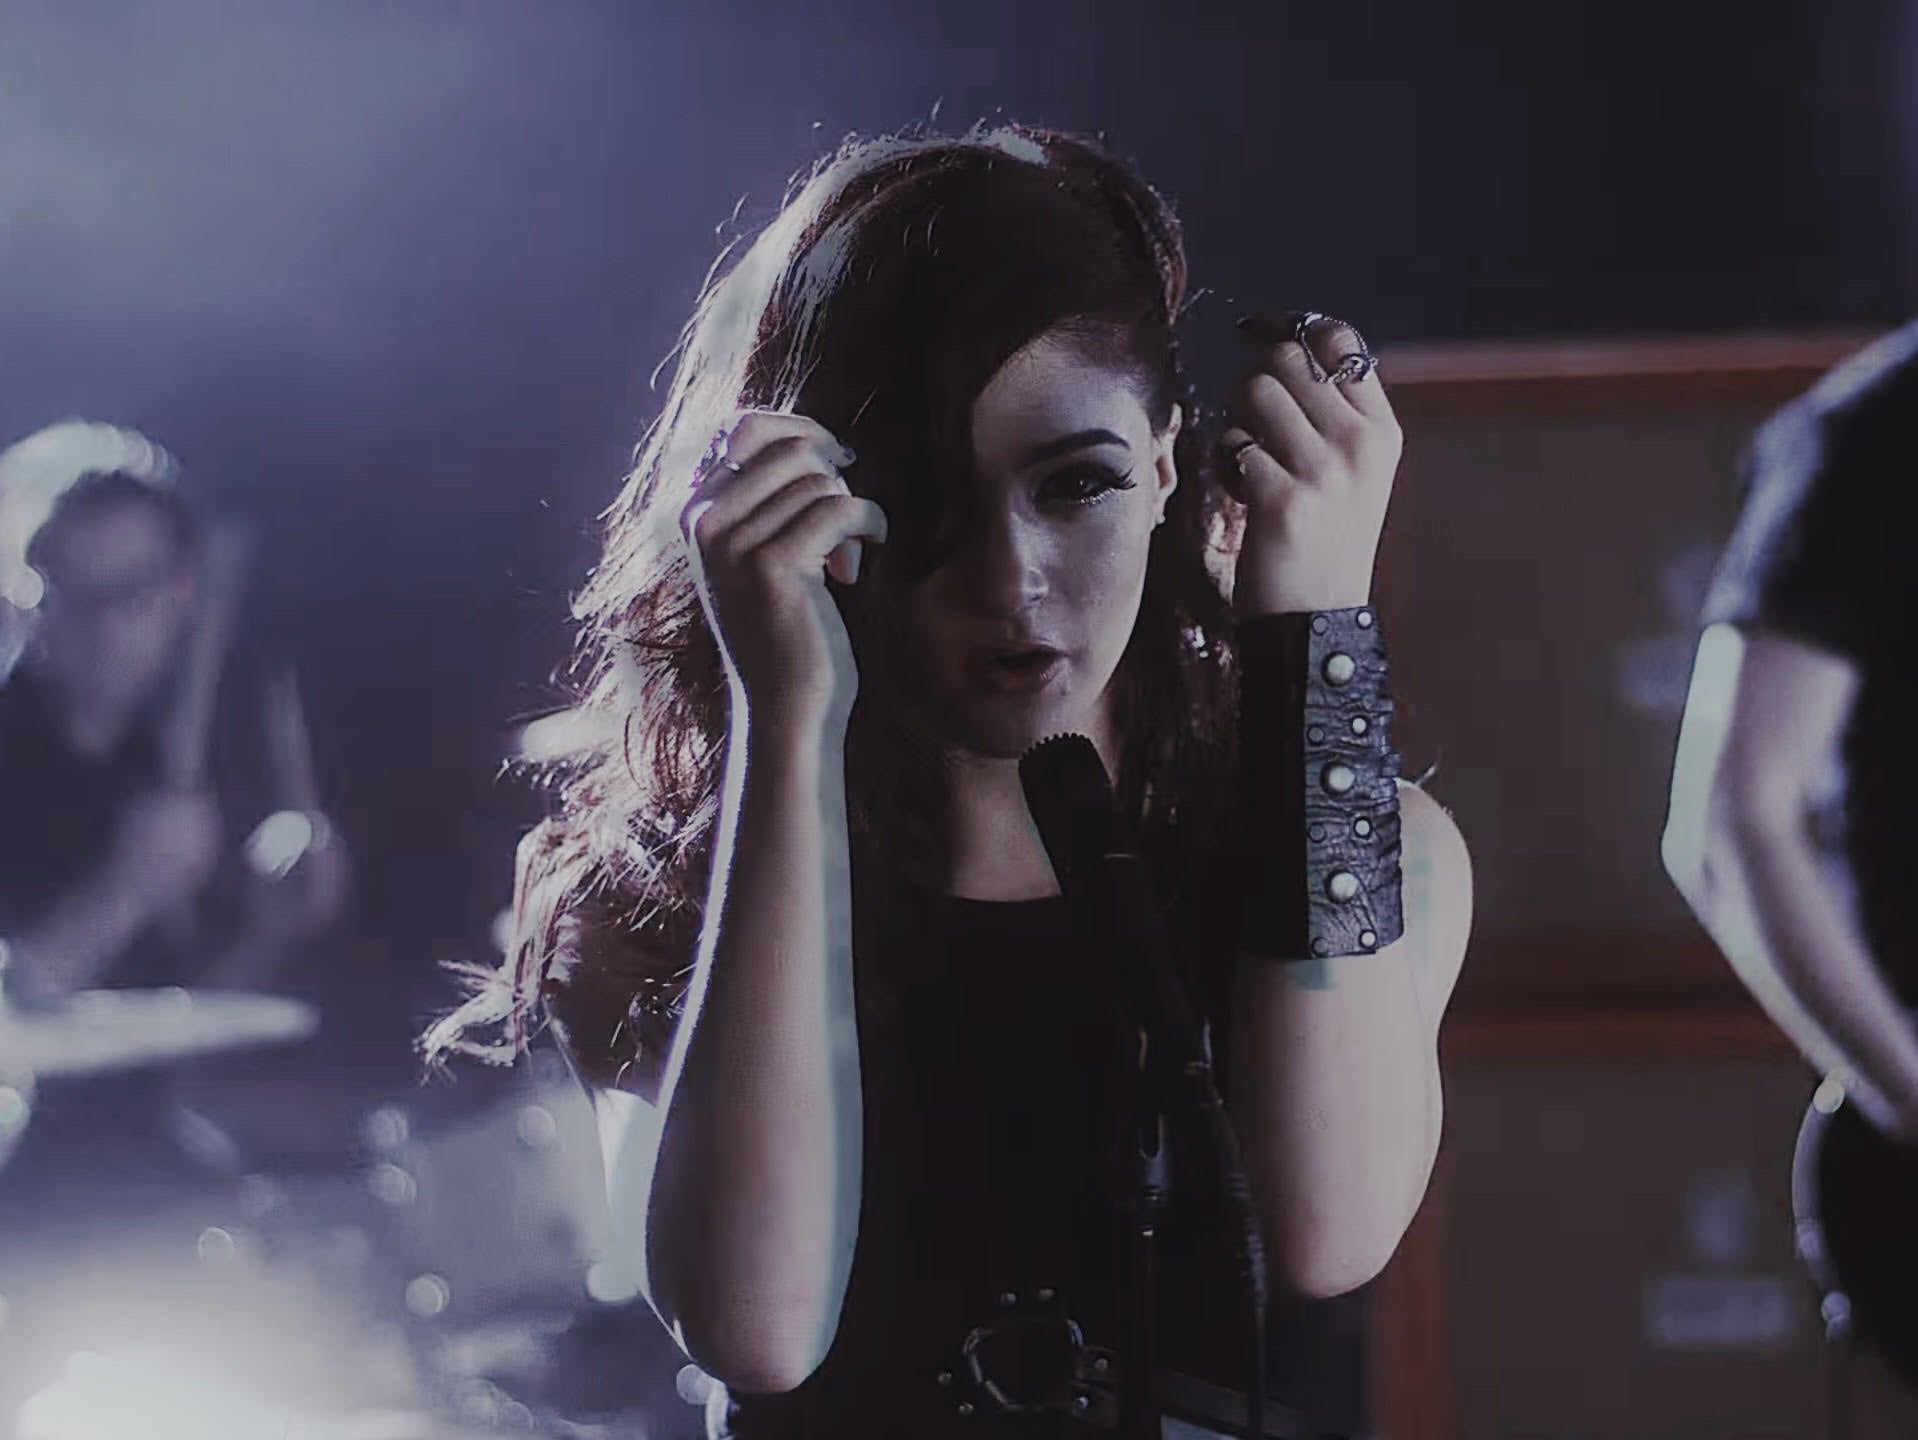 Chrissy Costanza of Against the Current wears JAKIMAC D-Ring Harness, Kingly Crown, and Warrior Cuff in "Talk" Music Video